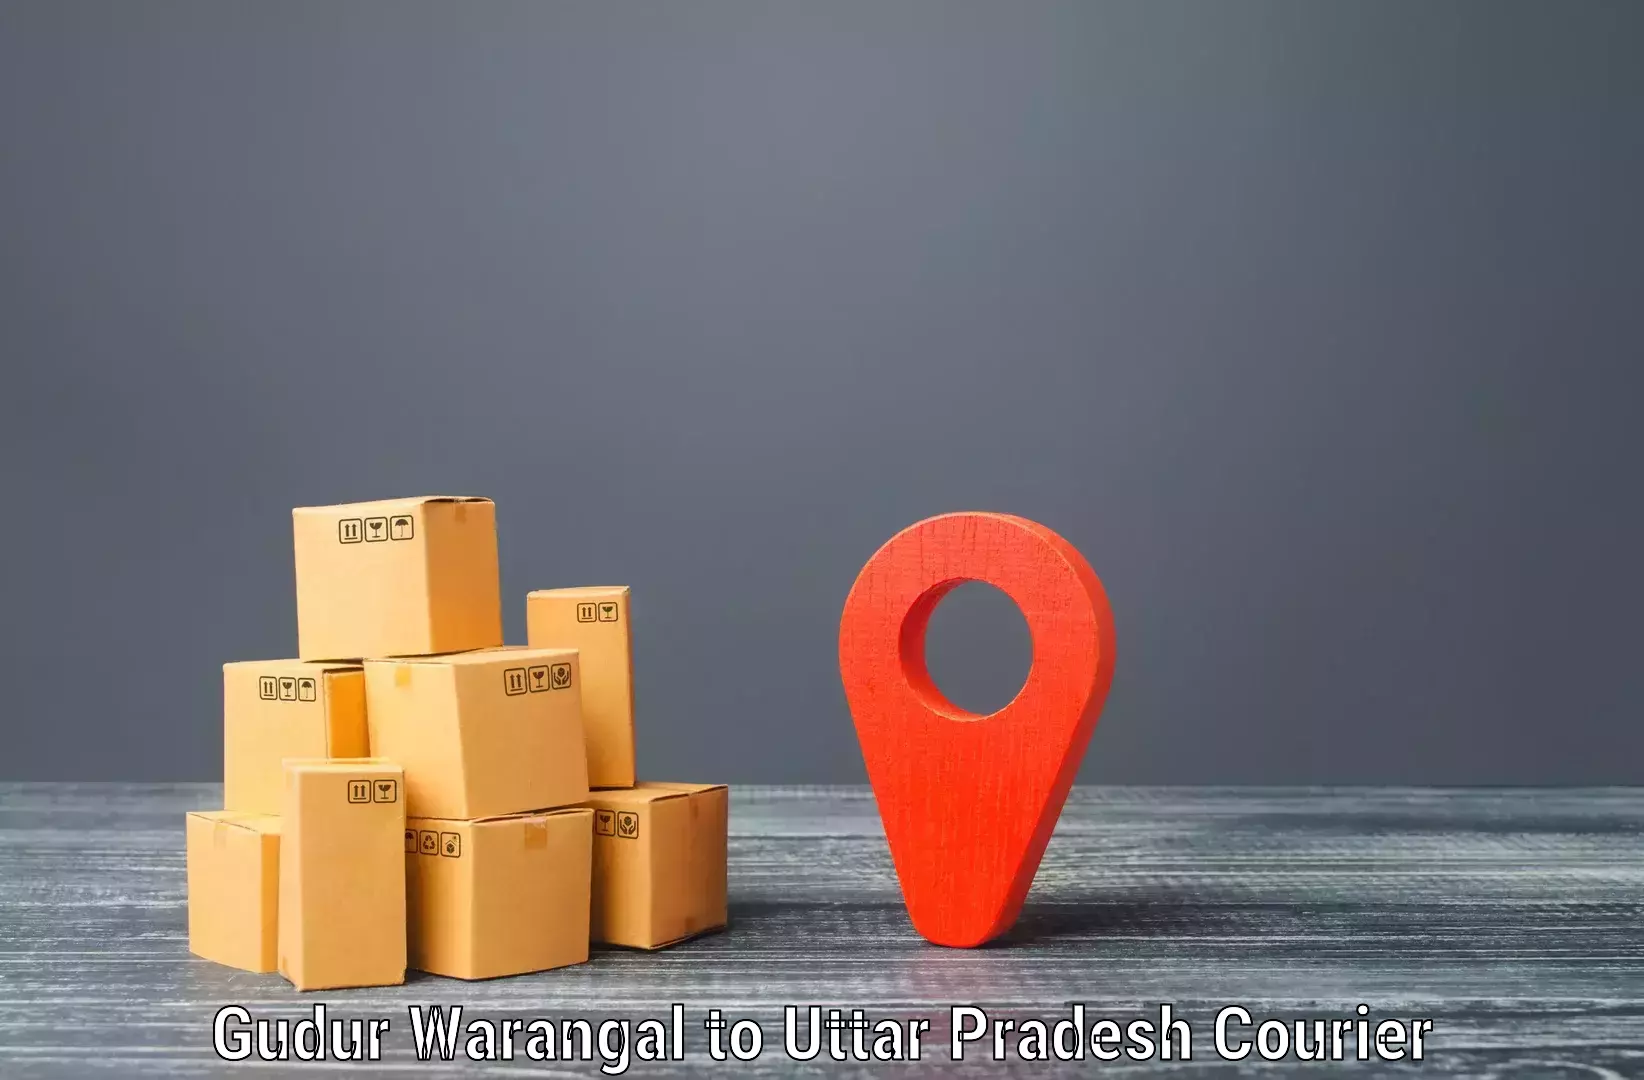 Secure package delivery in Gudur Warangal to Bailaha